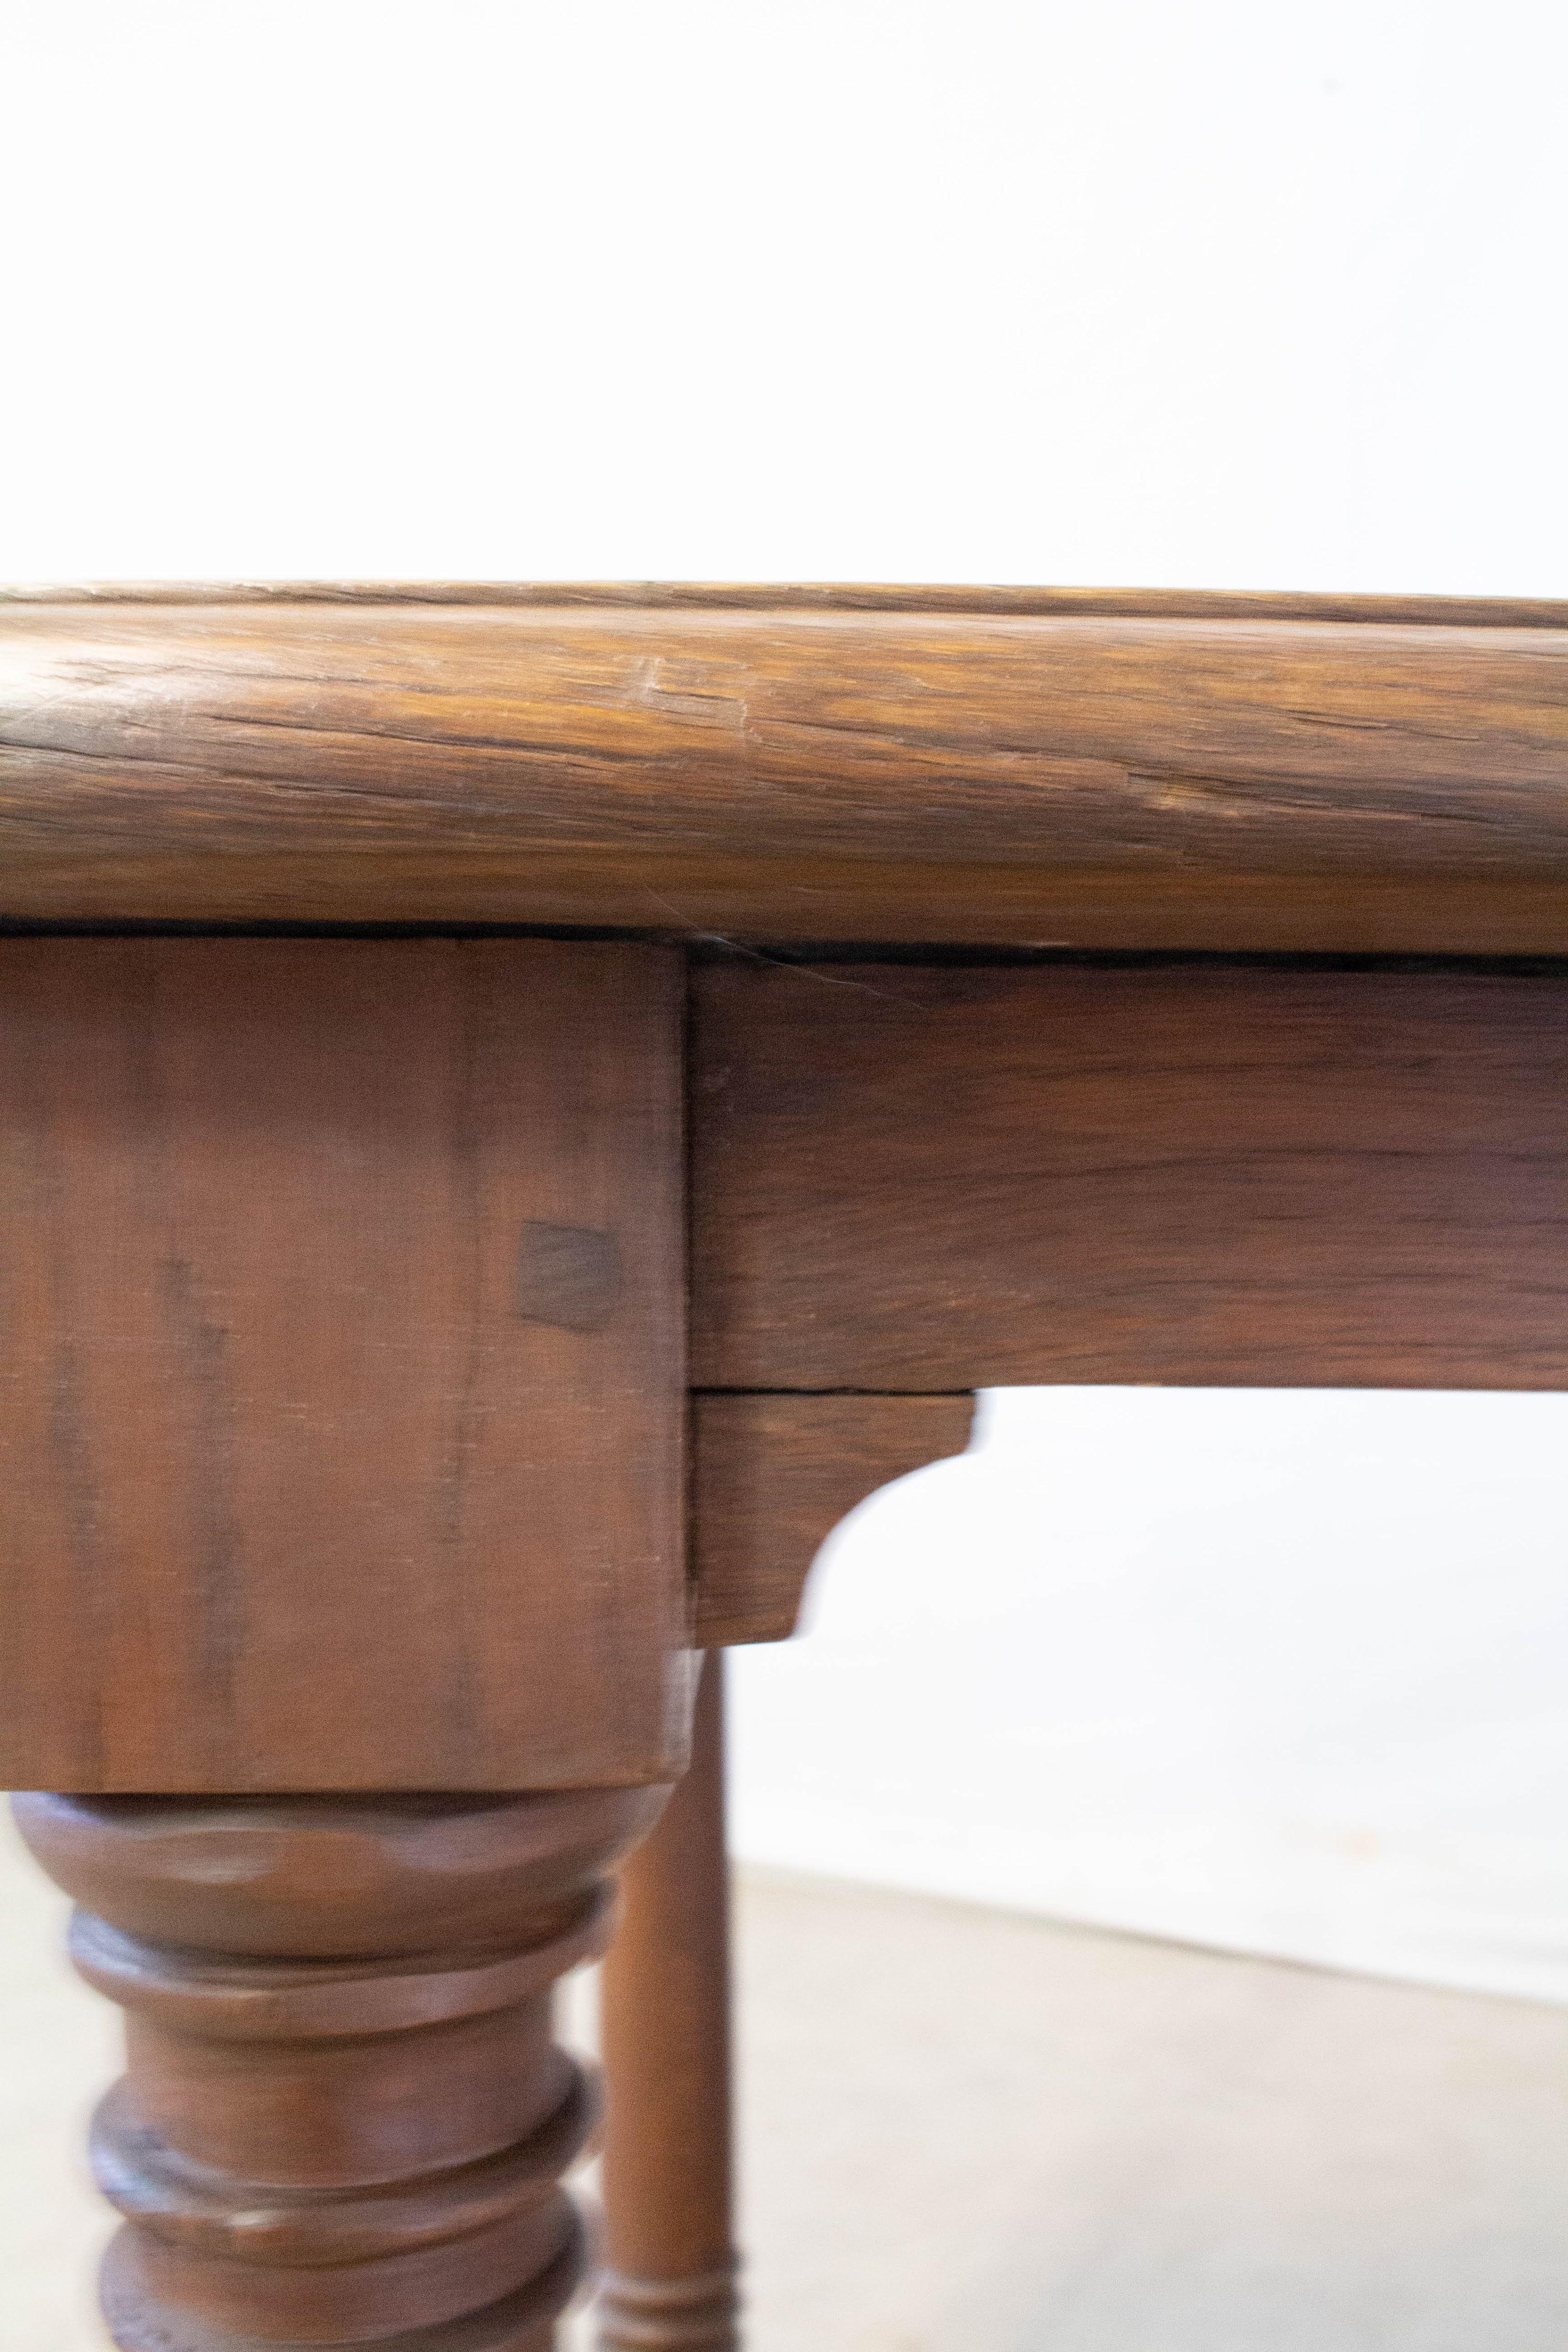 French Refectory Table Late 18th Century Provincial Oak Server Dining Table 7